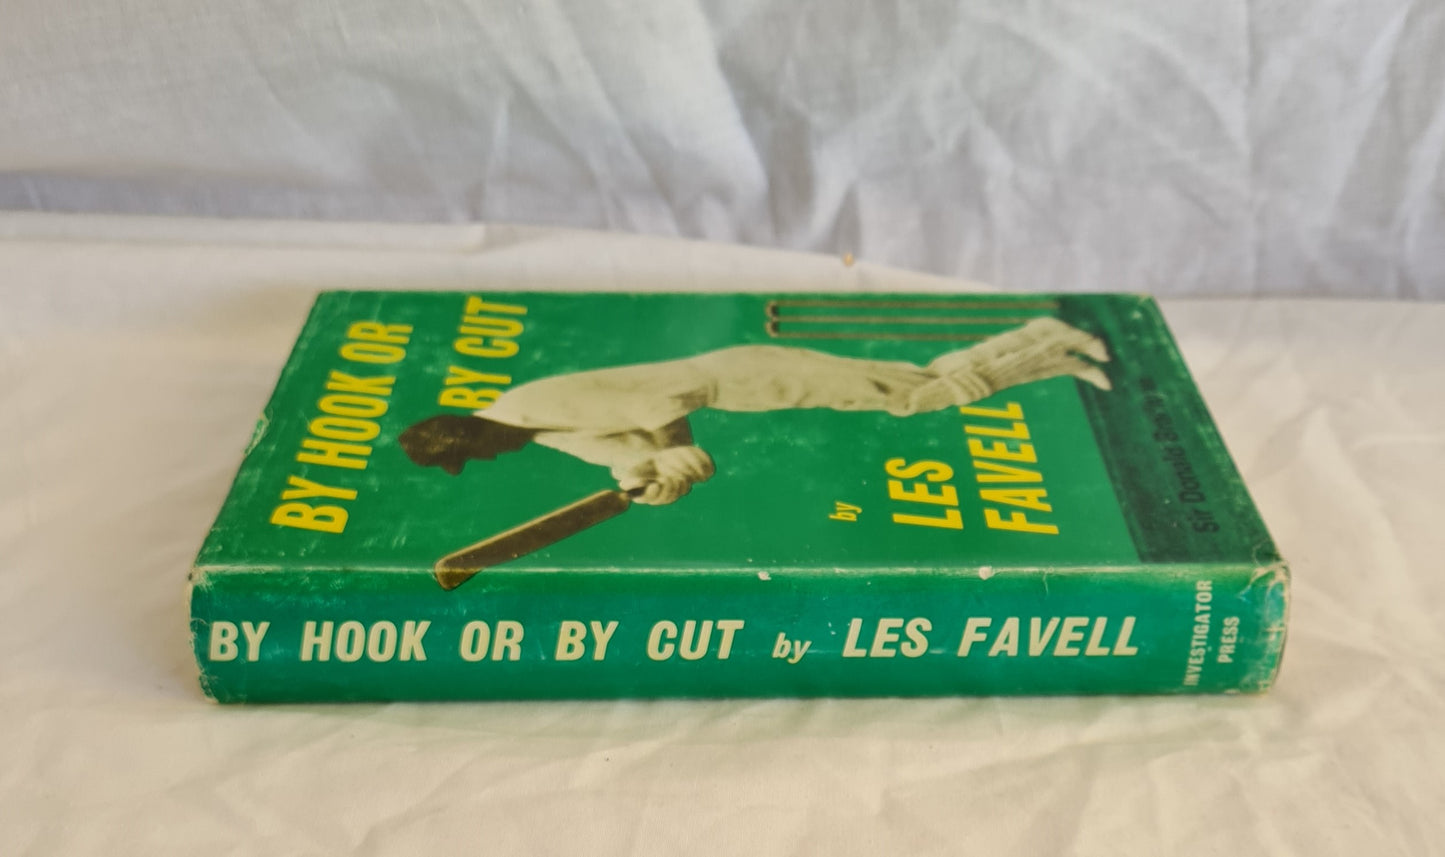 By Hook or By Cut by Les Favell